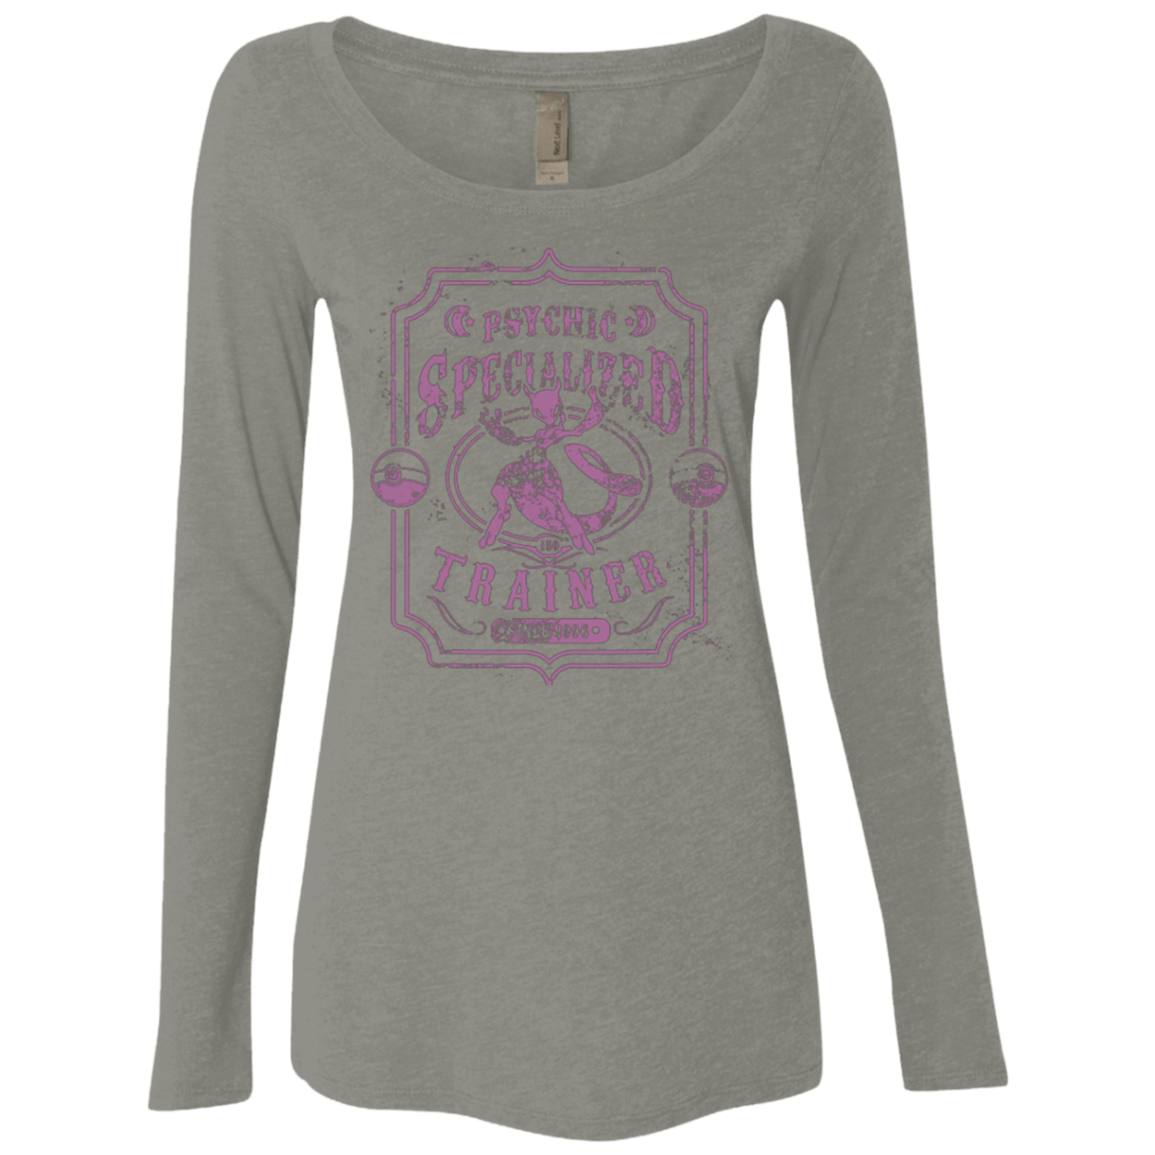 T-Shirts Venetian Grey / Small Psychic Specialized Trainer 2 Women's Triblend Long Sleeve Shirt